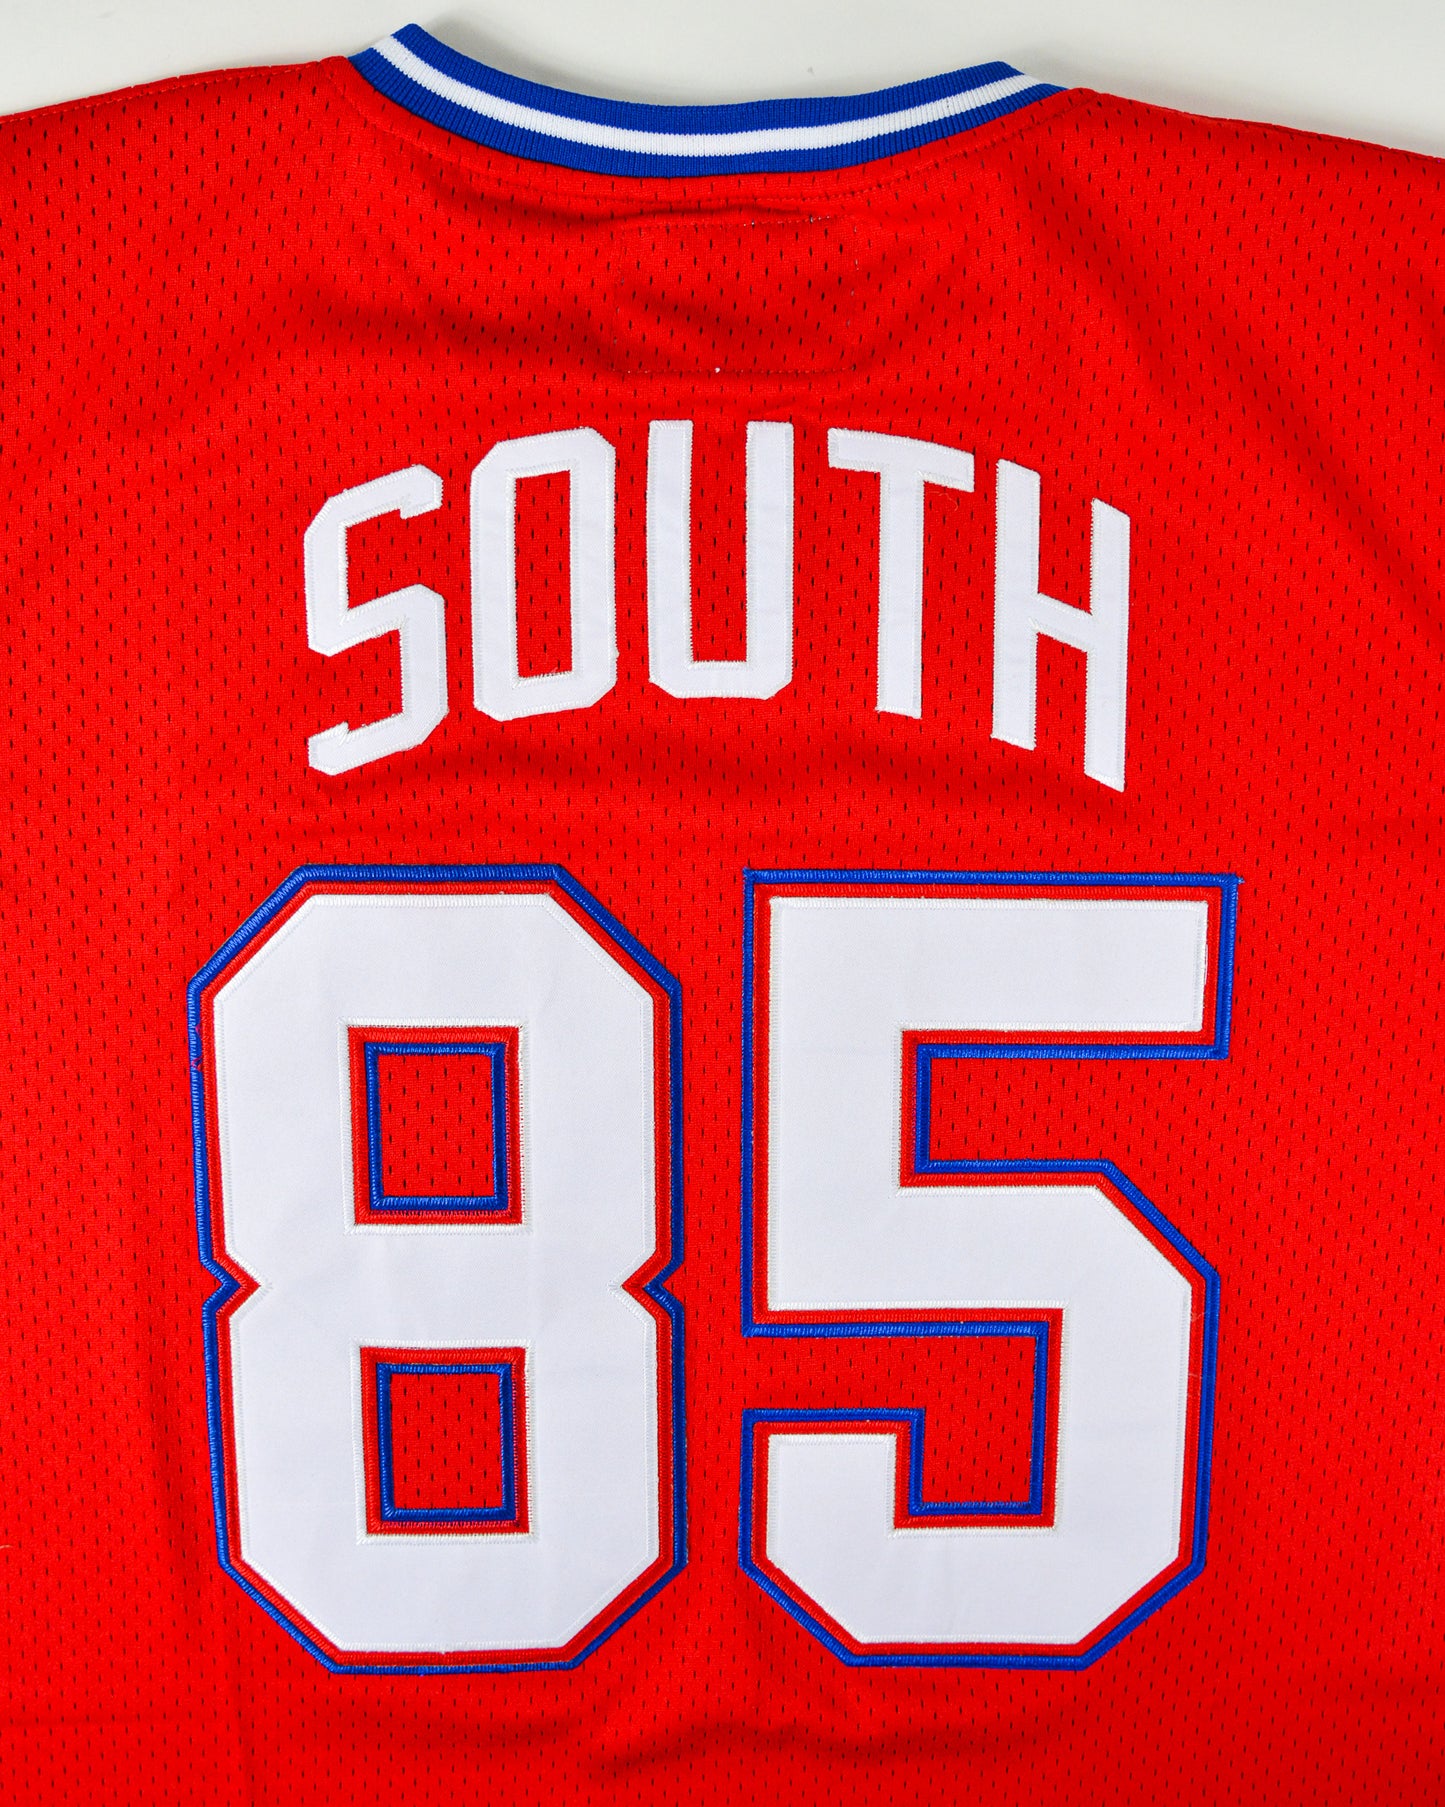 South Batting Jersey - Red